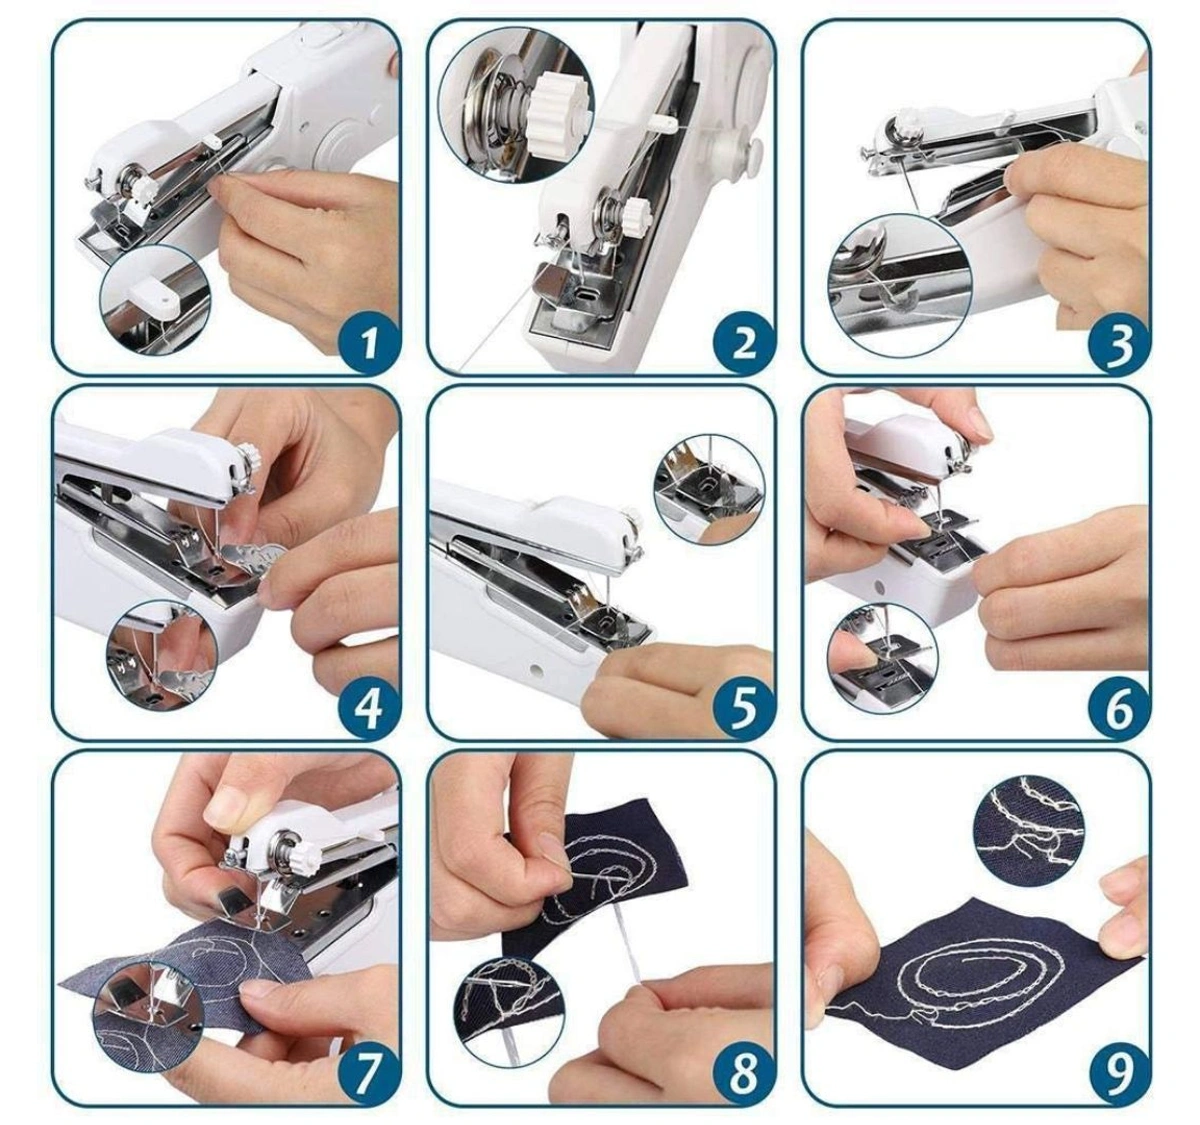 Handheld Electric Sewing Machine Handy Stitch Sewing Device Tool